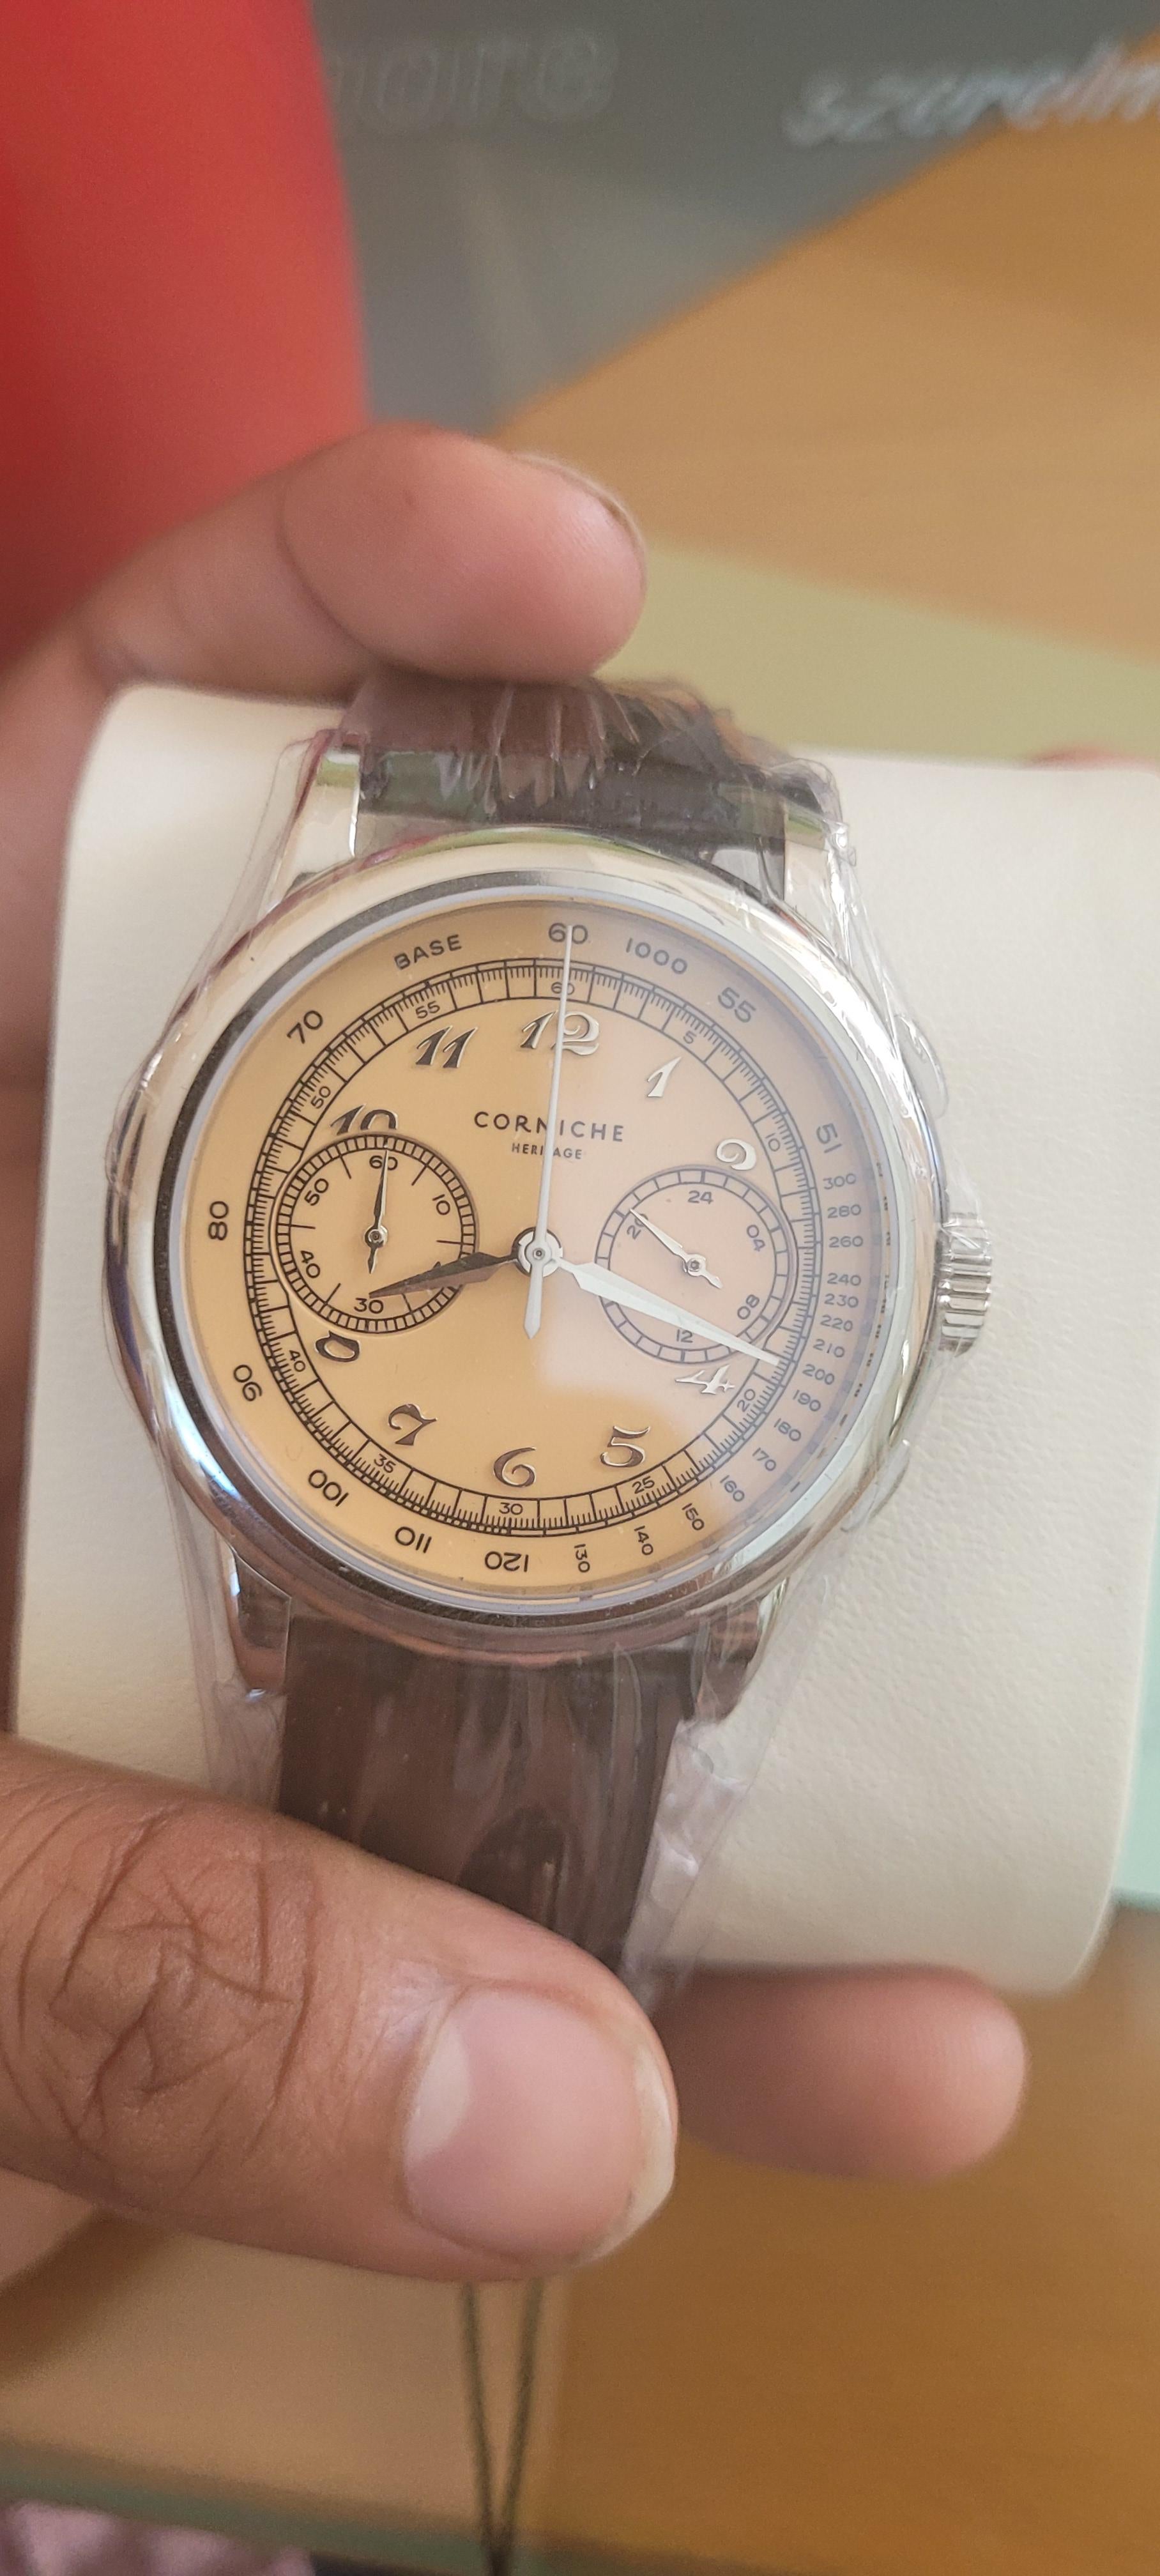 WTS] Corniche Limited Edition Chronograph Salmon Dial Sold Out 700 